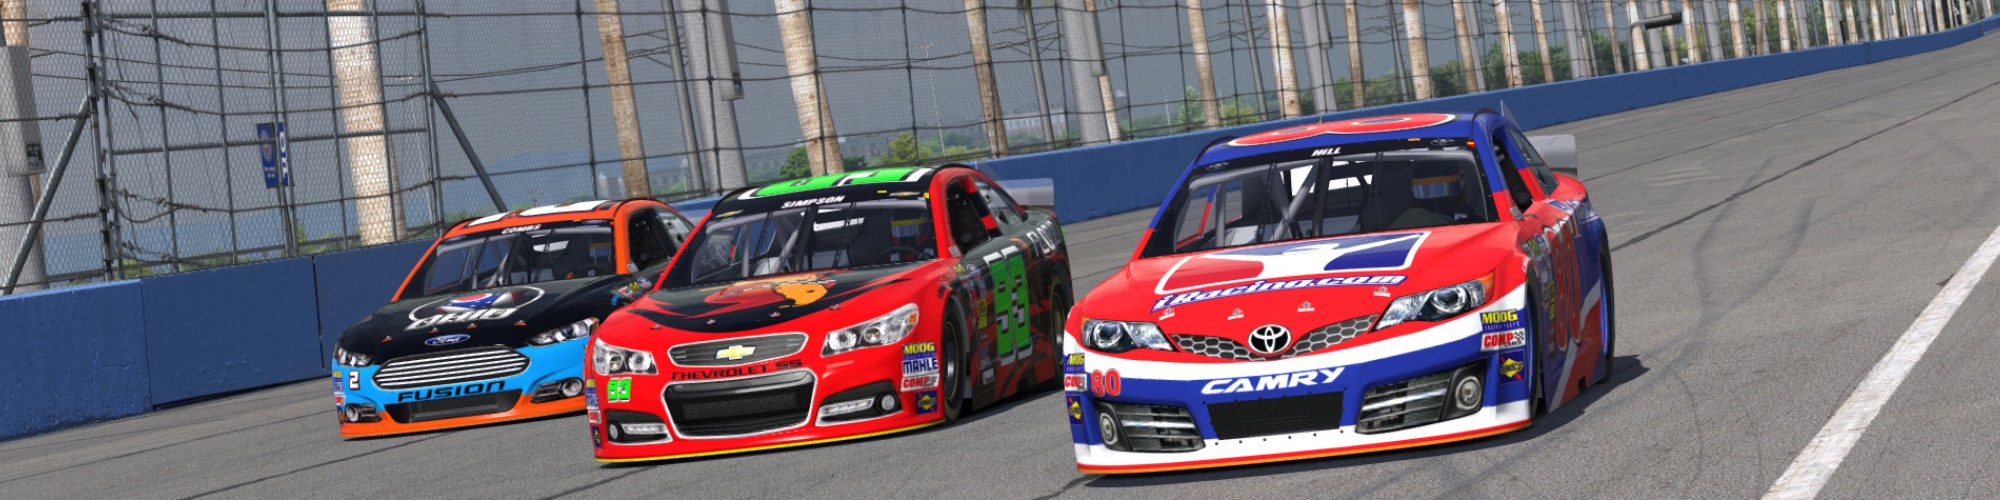 iRacing cover image